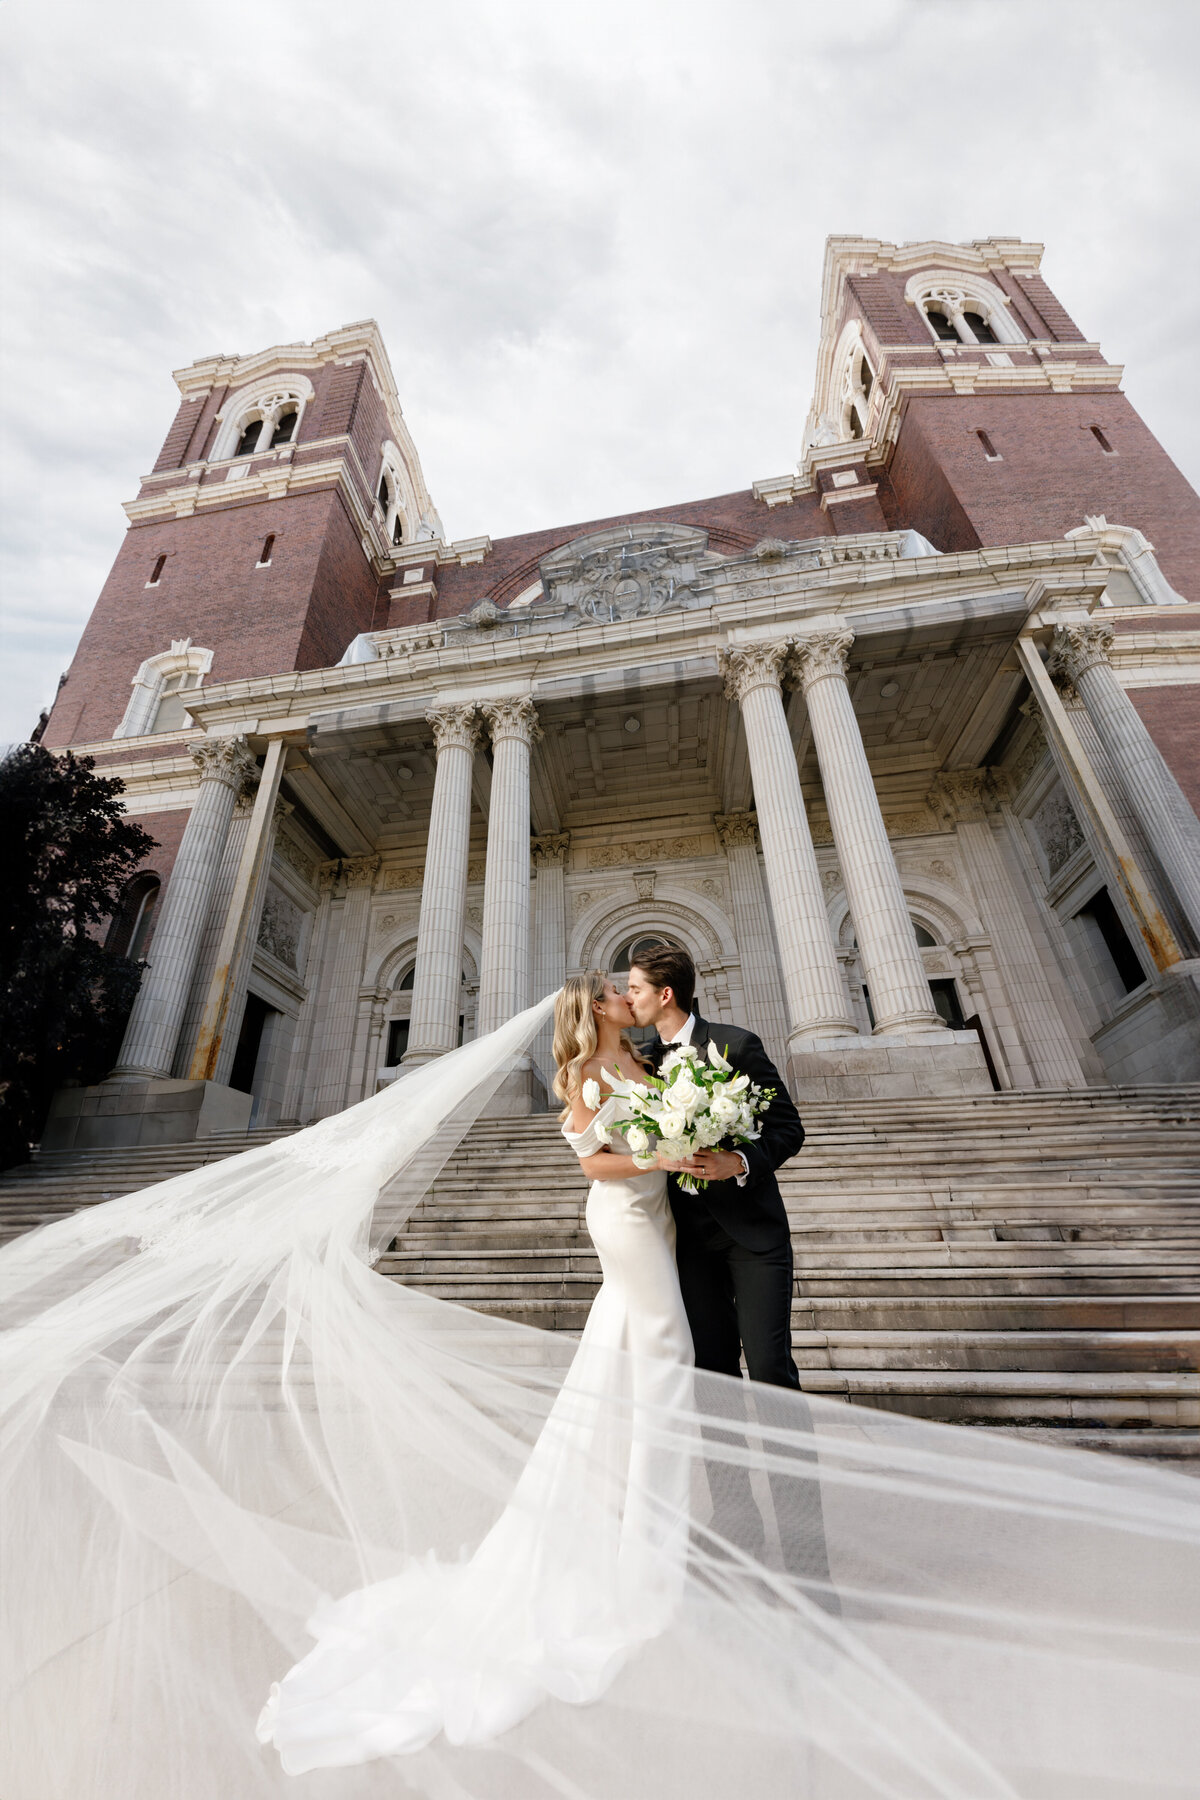 Aspen-Avenue-Chicago-Wedding-Photographer-Chicago-Athletic-Association-Simplicitee-XO-Design-Co-St-Mary-of-the-Angels-Church-Anomalie-Beauty-Timeless-Vogue-79